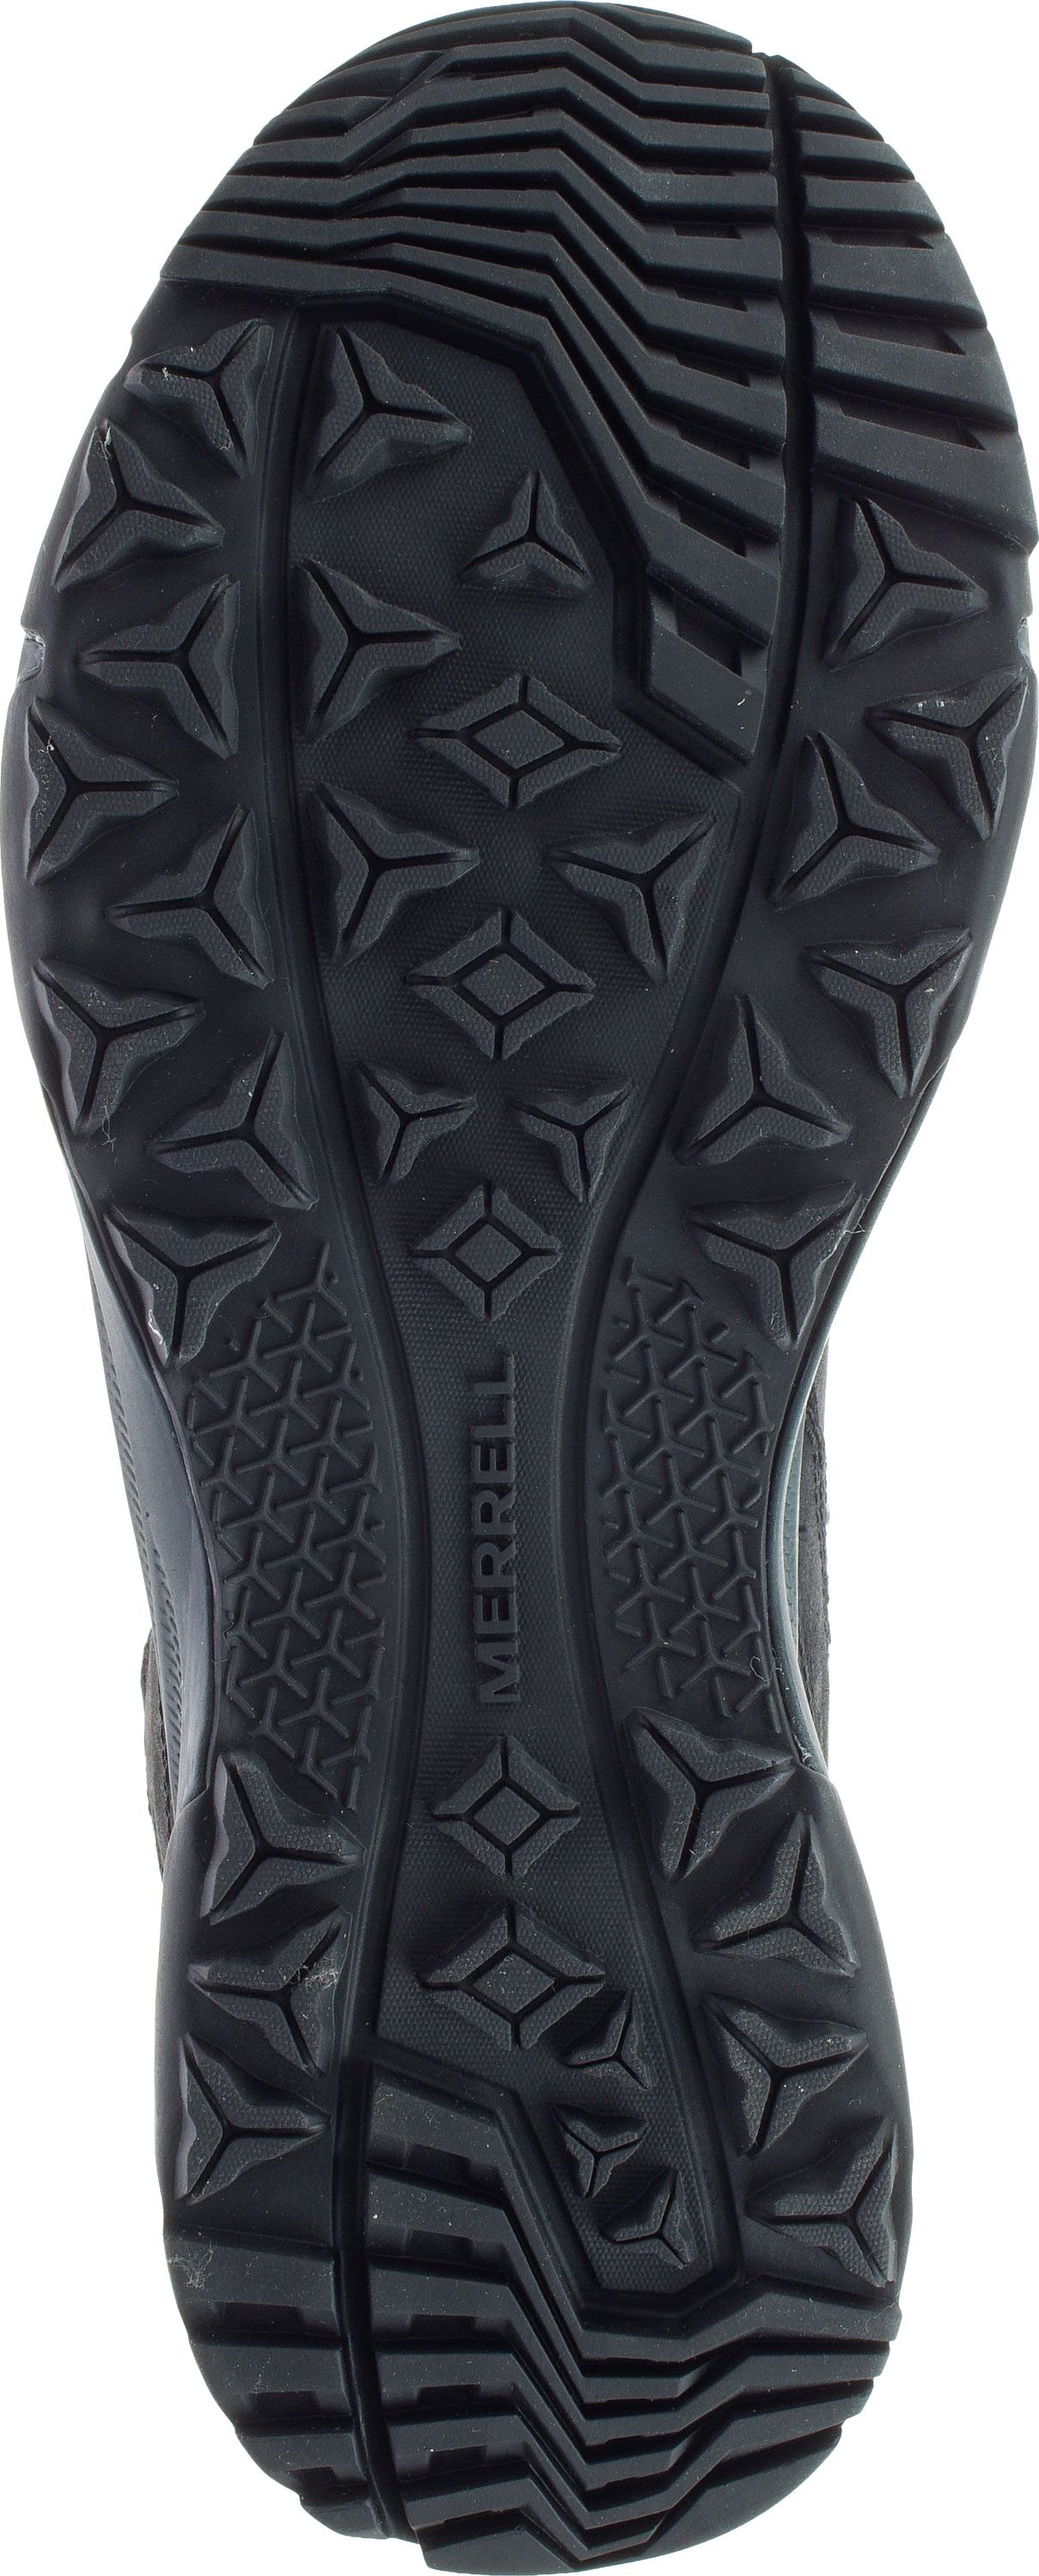 Merrell Boots Erie Mid Leather Waterproof Black